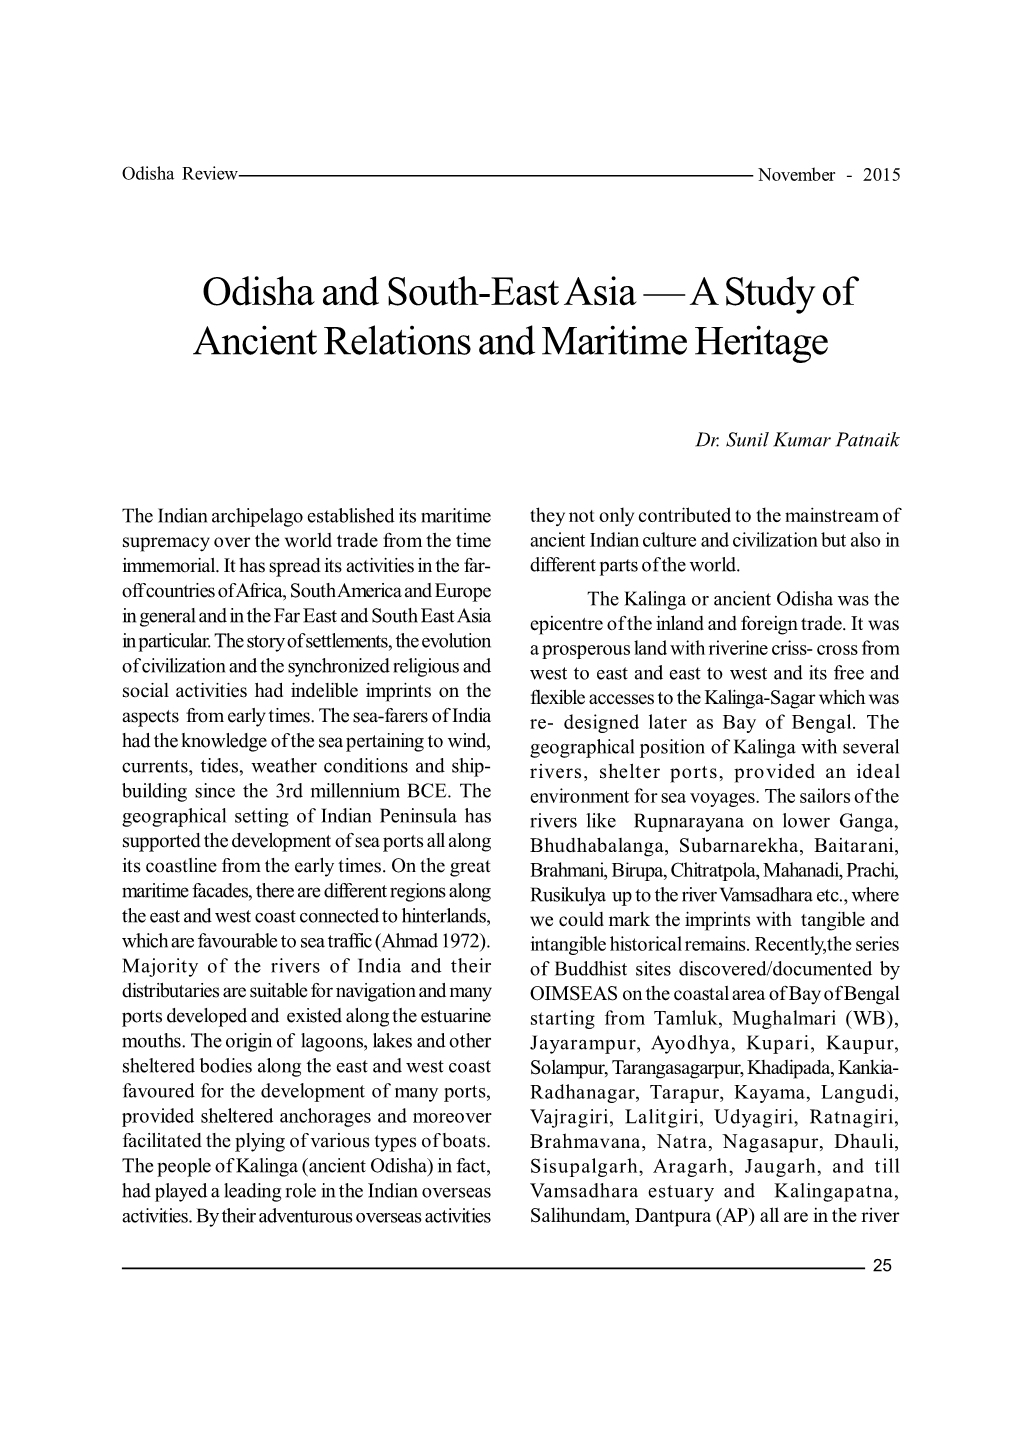 Odisha and South-East Asia — a Study of Ancient Relations And